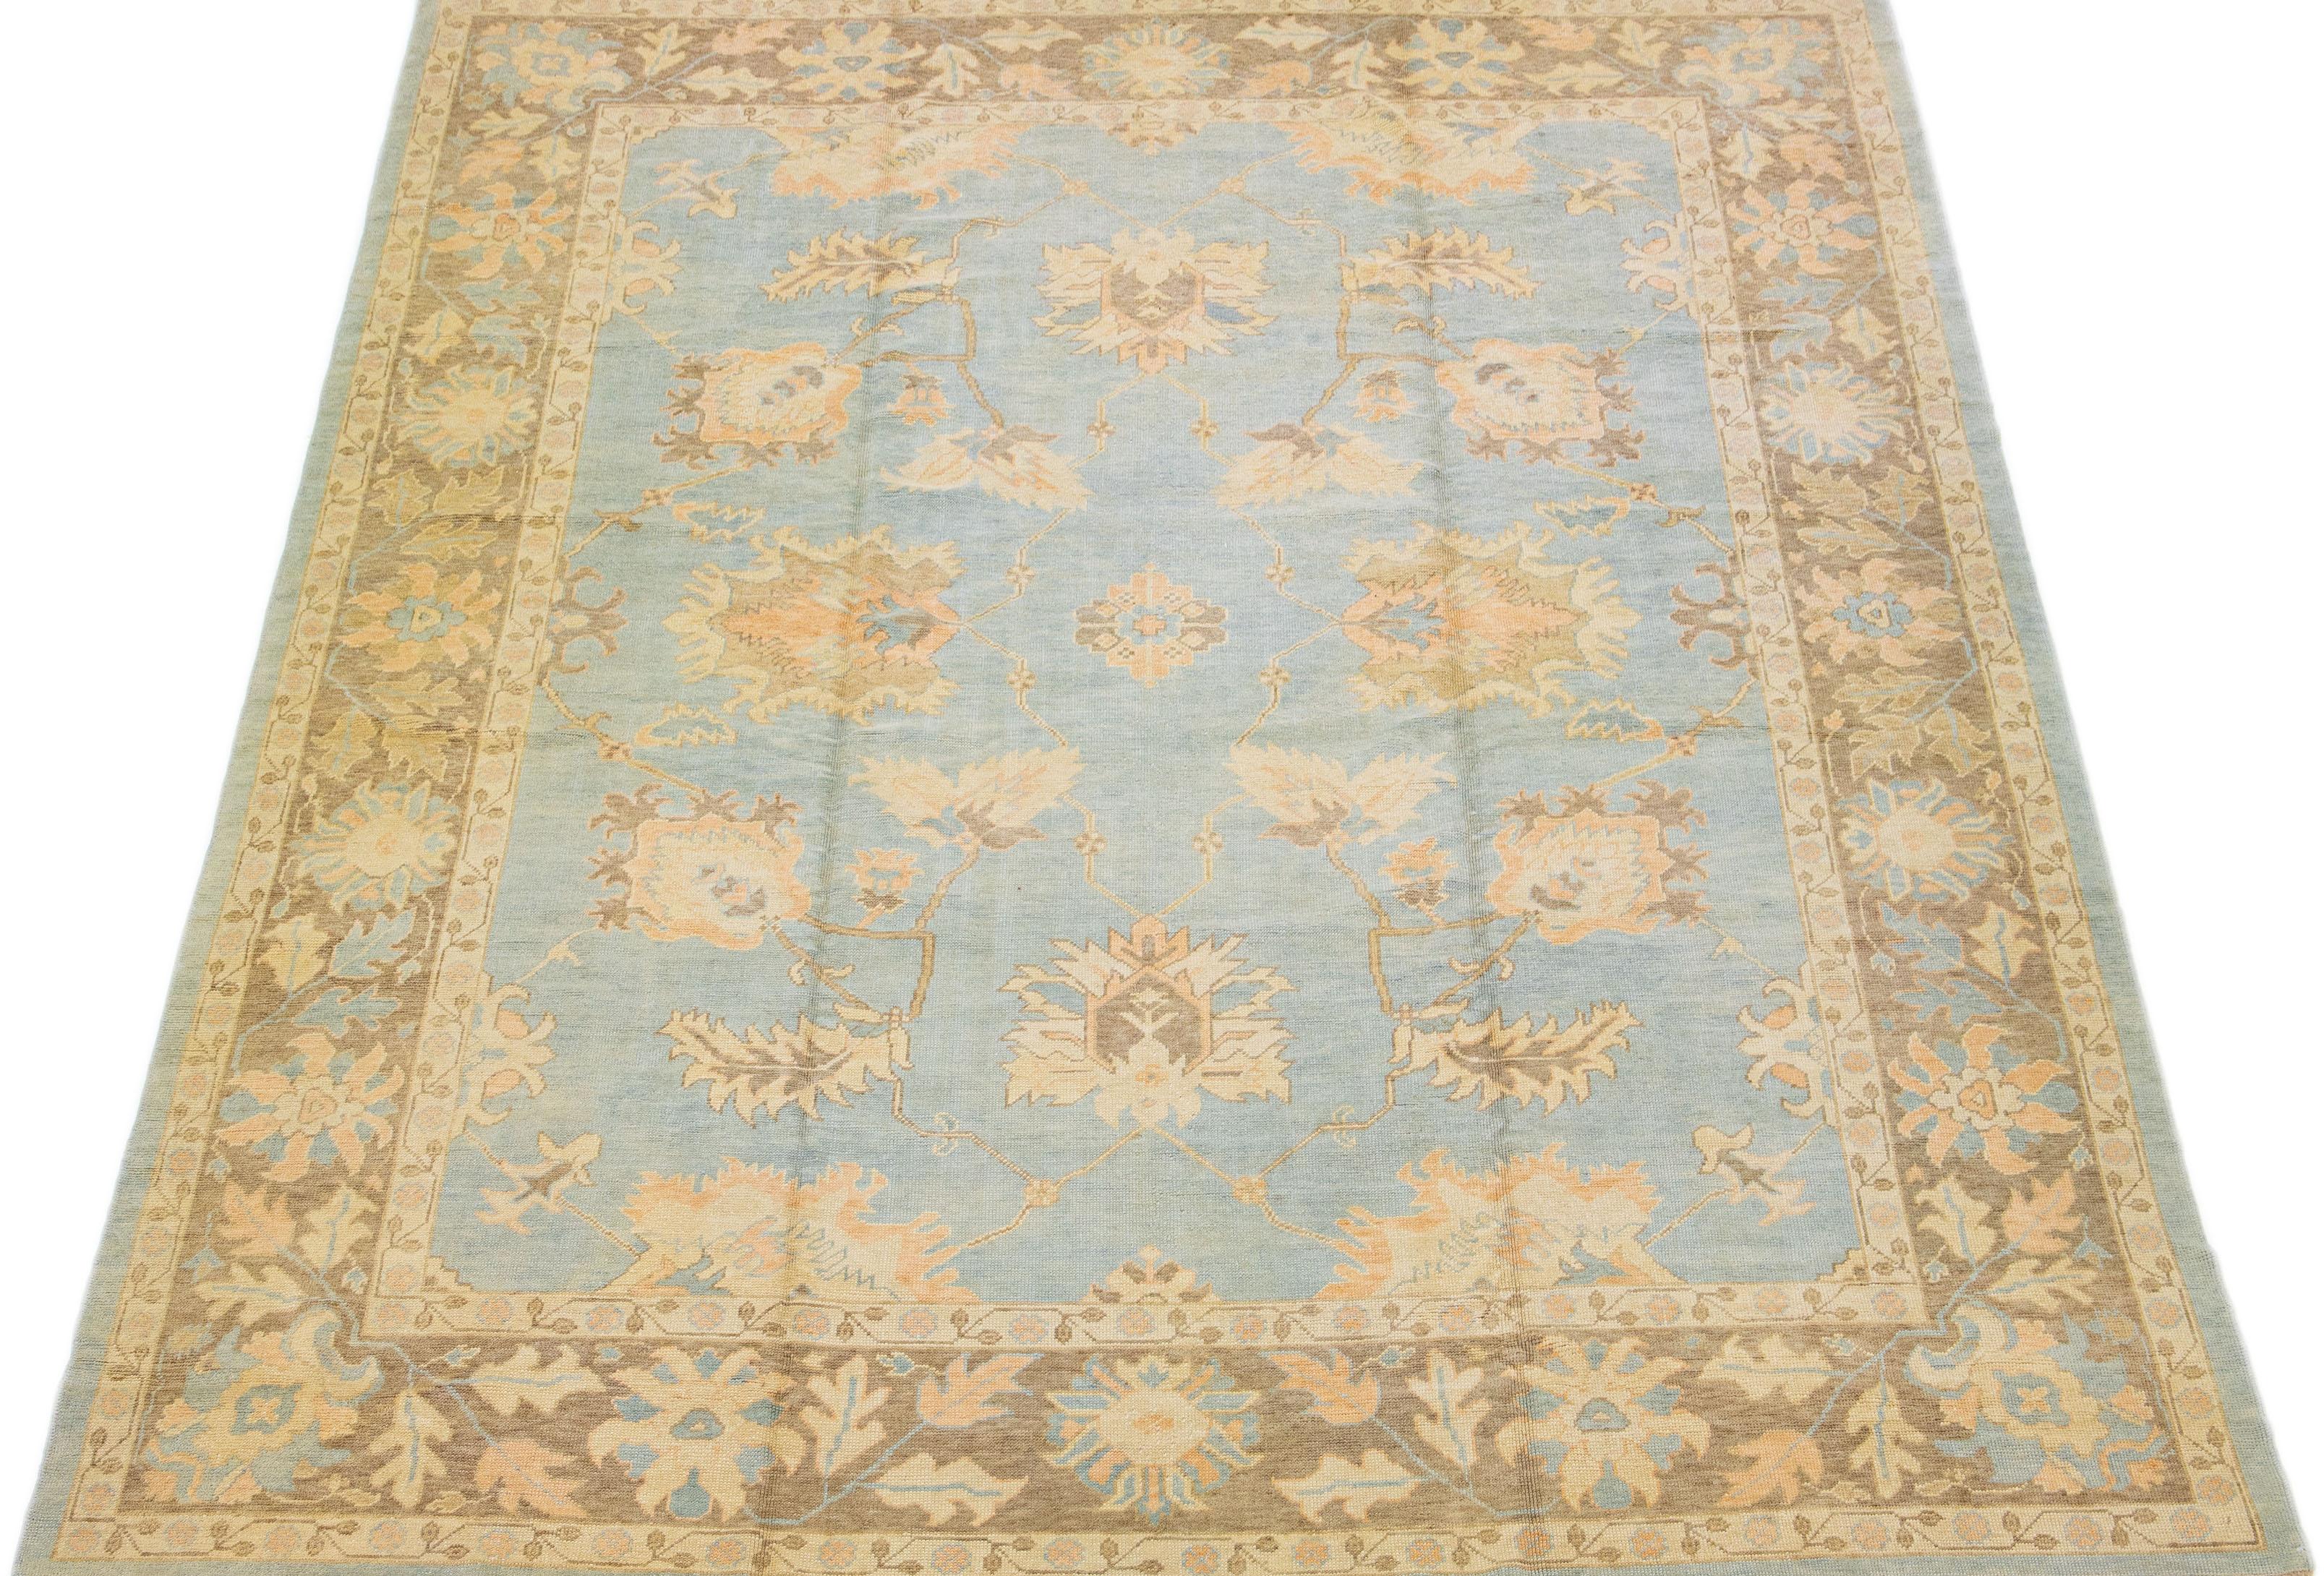 This modern Turkish wool rug boasts a light blue field, beautifully framed with brown, peach, and beige highlights in an intricate all-over floral pattern.

This rug measures 11'7